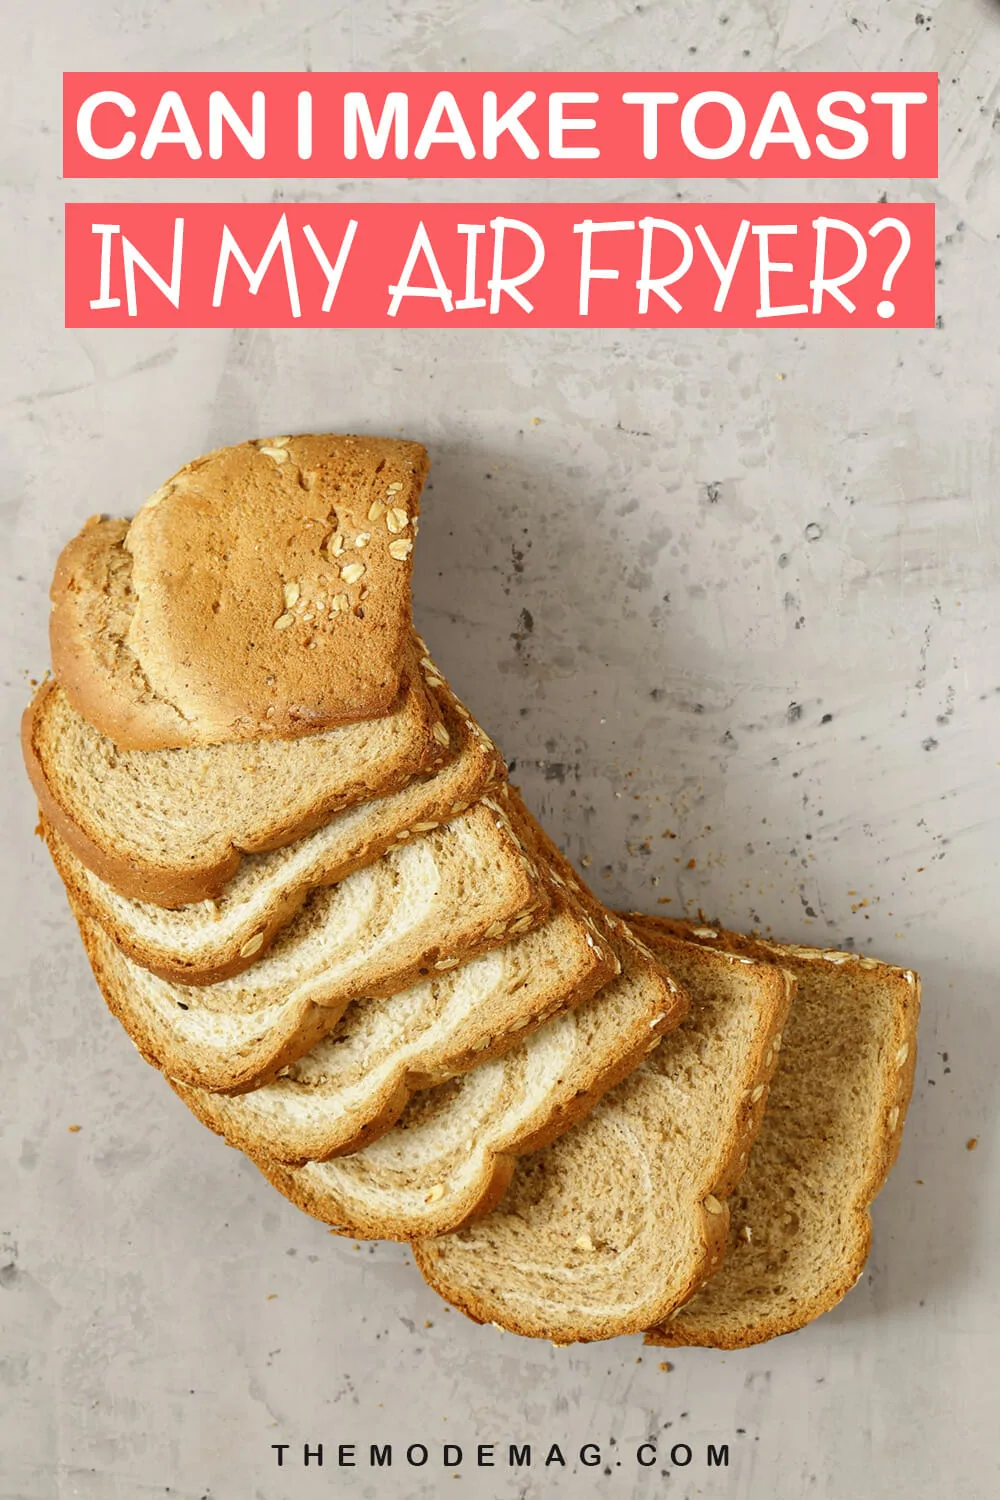 Can I Make Toast In My Air Fryer?